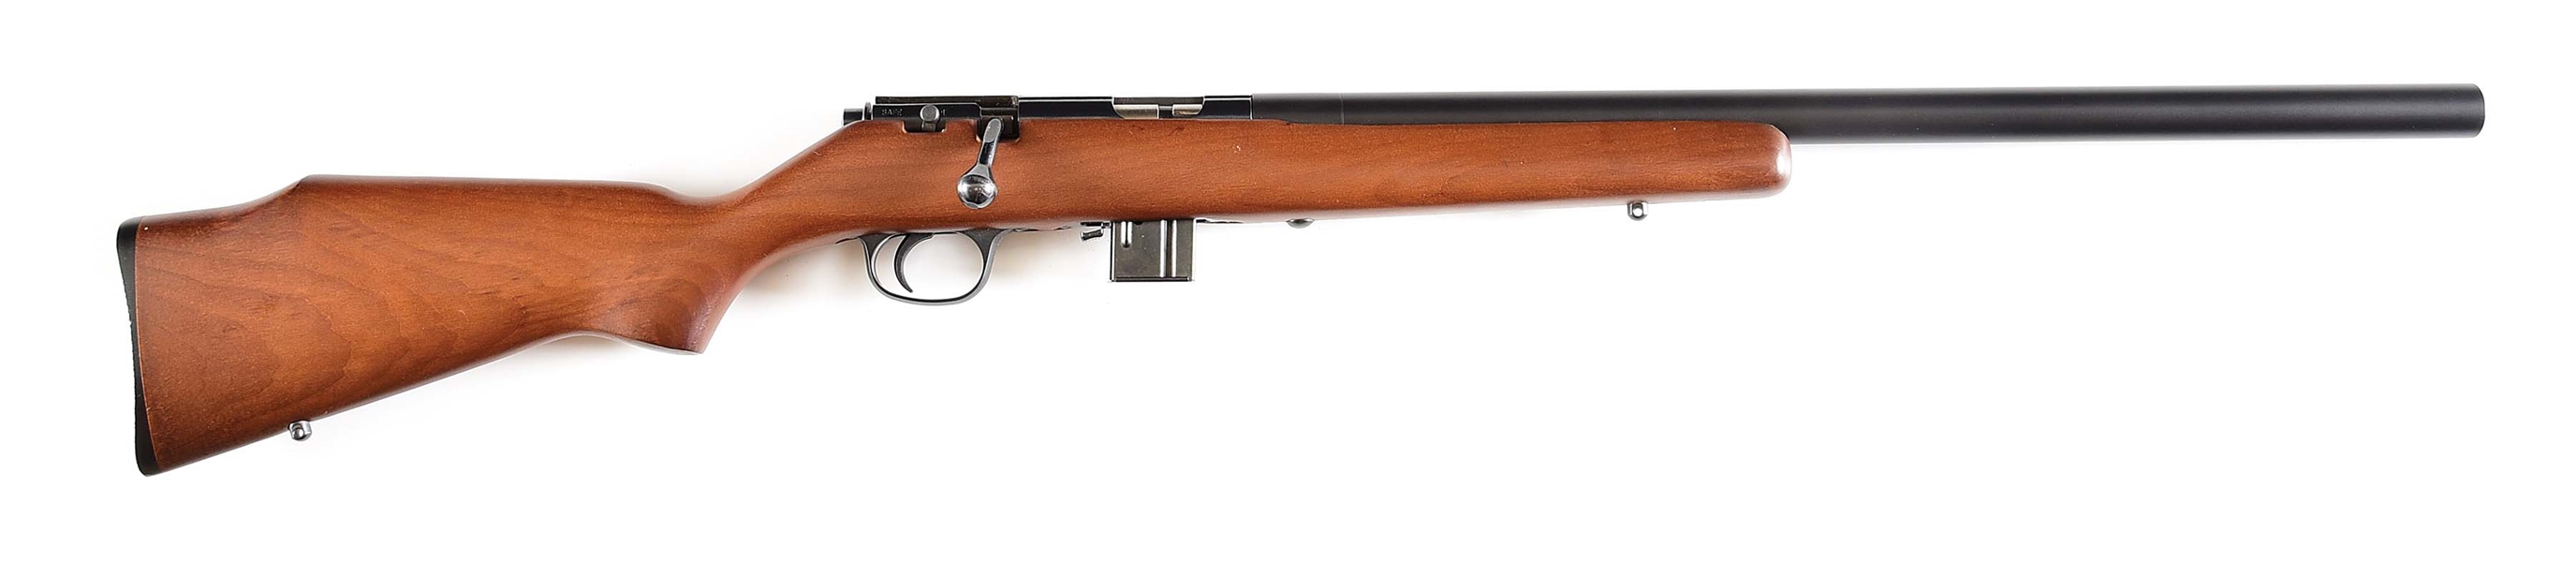 (N) MARLIN MODEL 925M .22 WINCHESTER MAGNUM BOLT ACTION RIFLE WITH INTEGRAL SRT ARMS SILENCER (SILENCER).